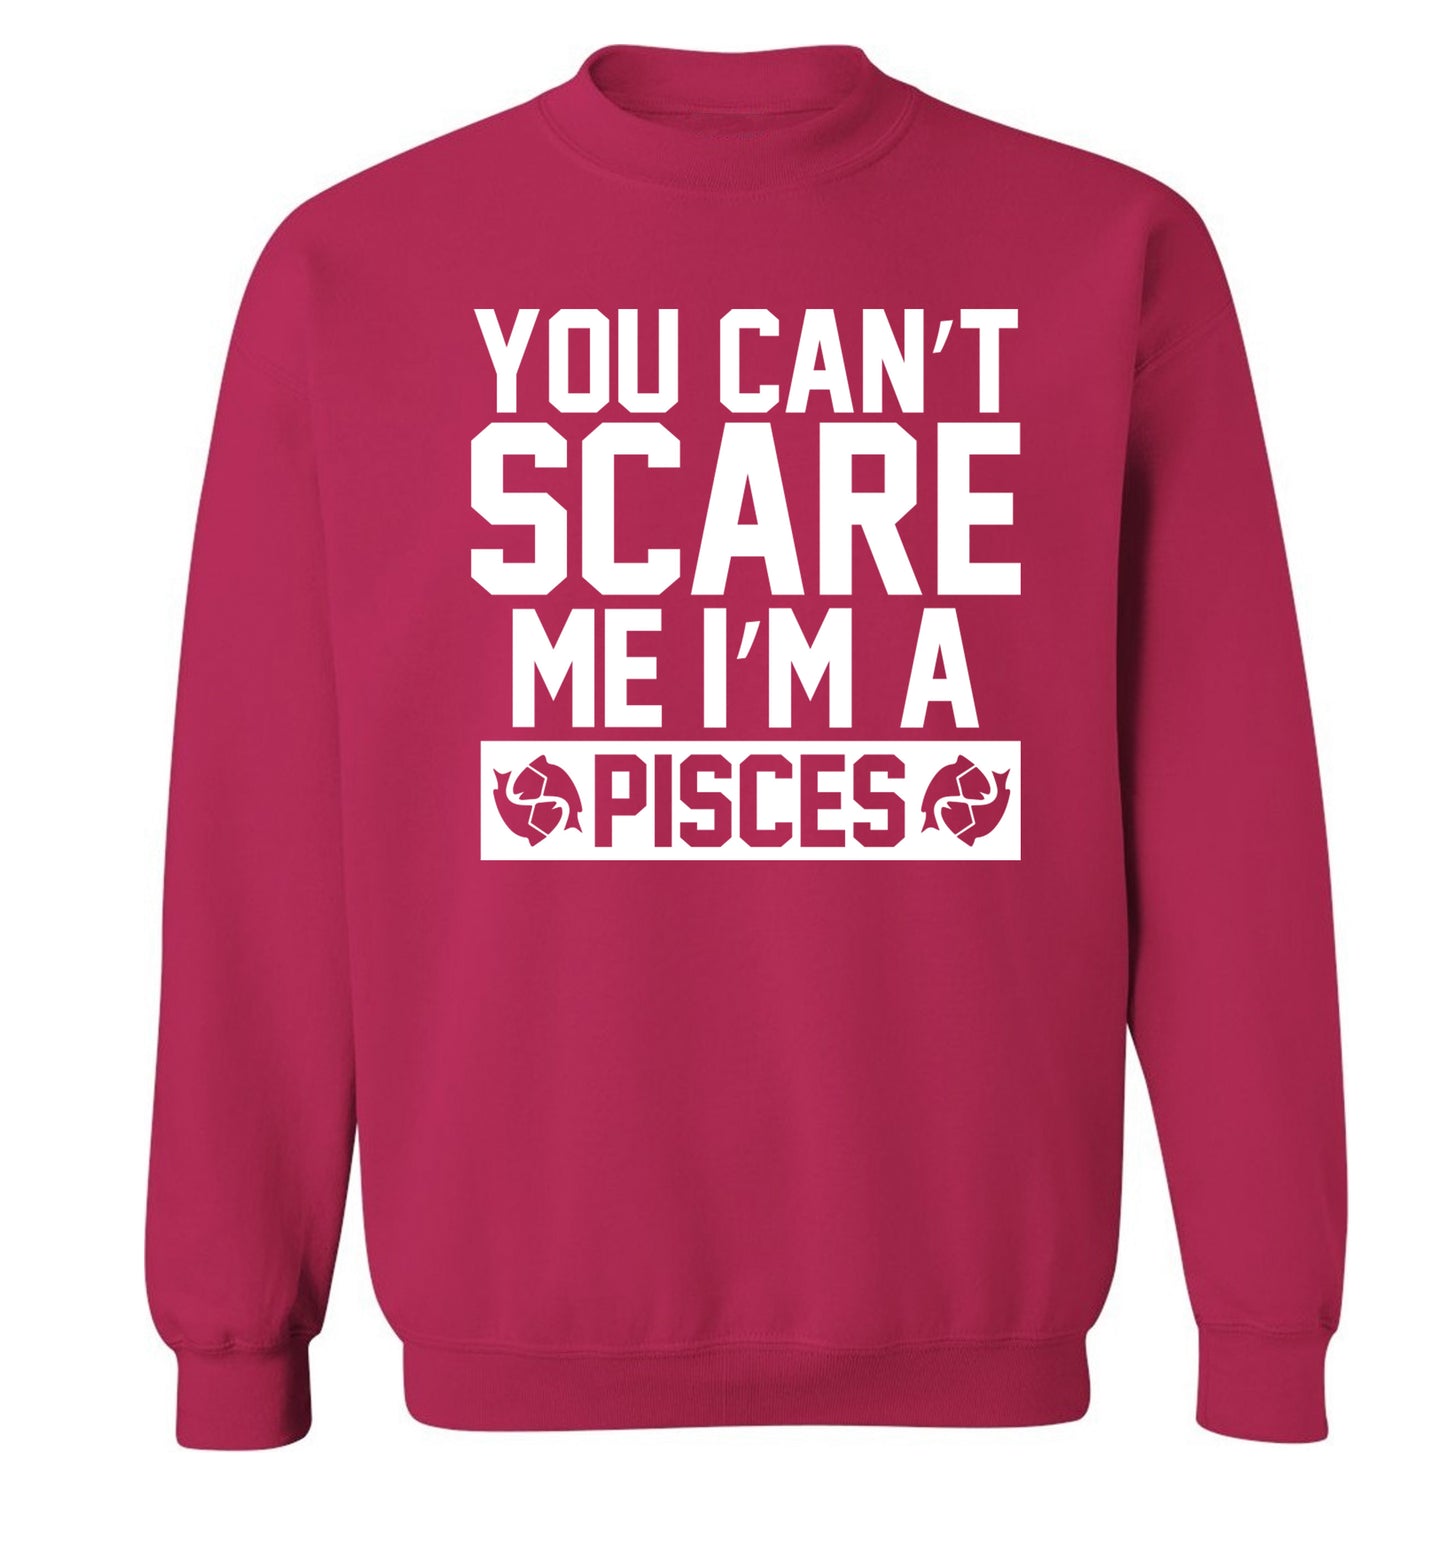 You can't scare me I'm a pisces Adult's unisex pink Sweater 2XL